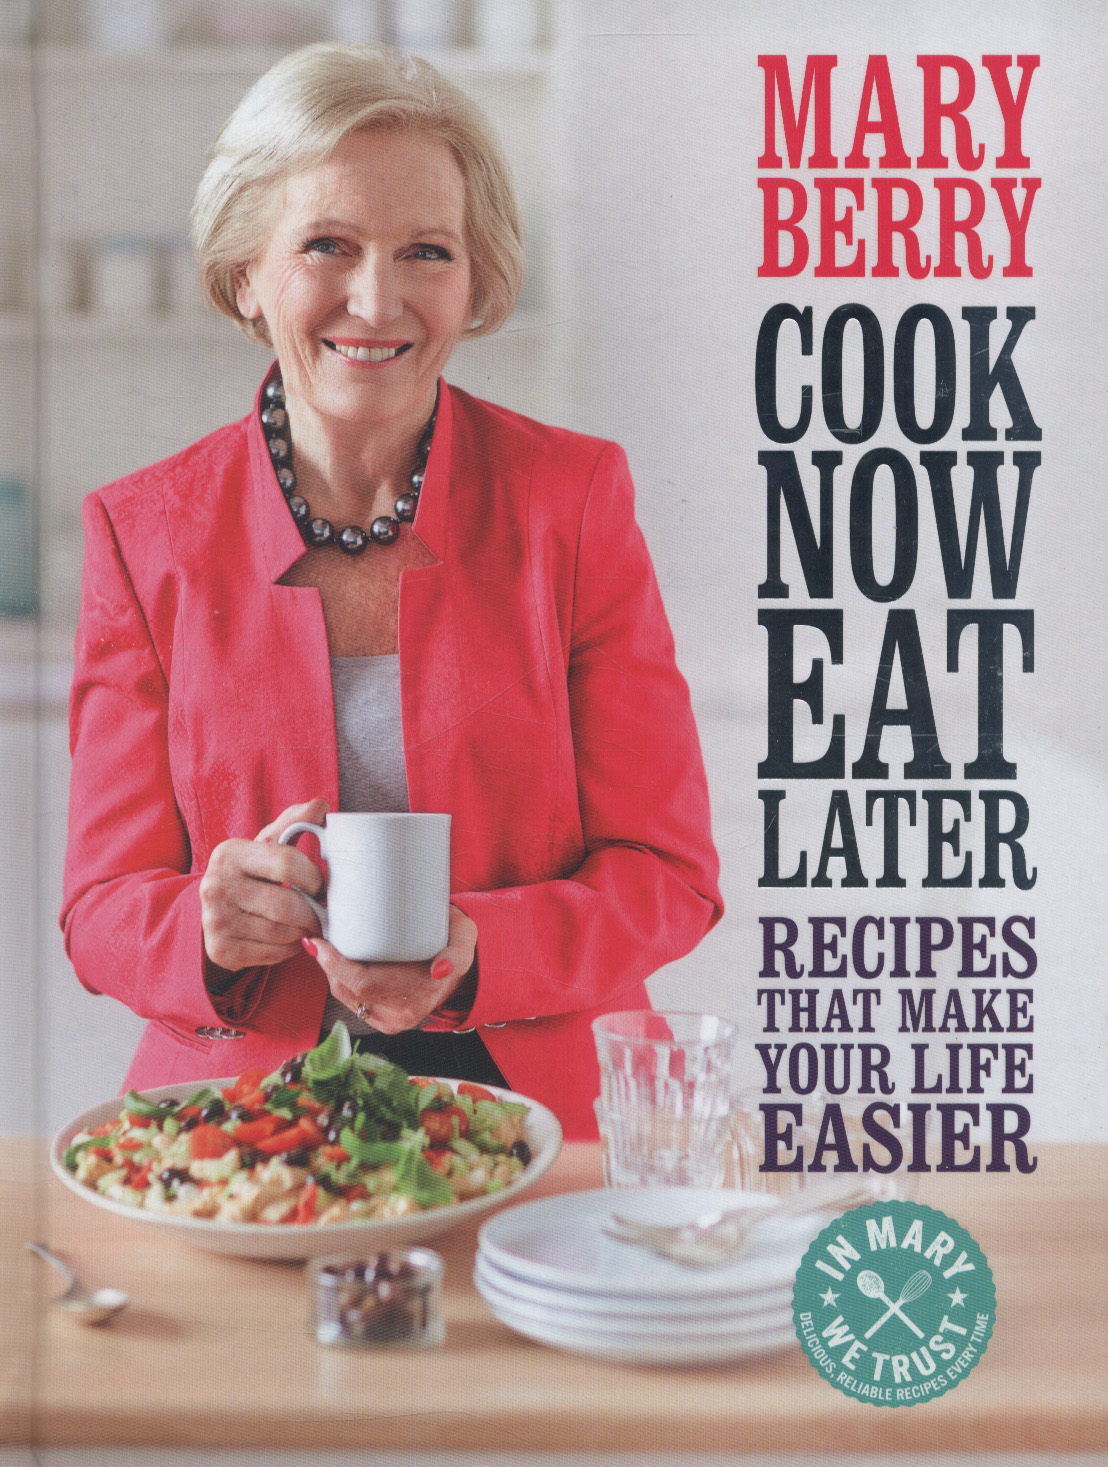 Your life easier. Bake off Mary Berry. Mary Berry Retro Cooking.